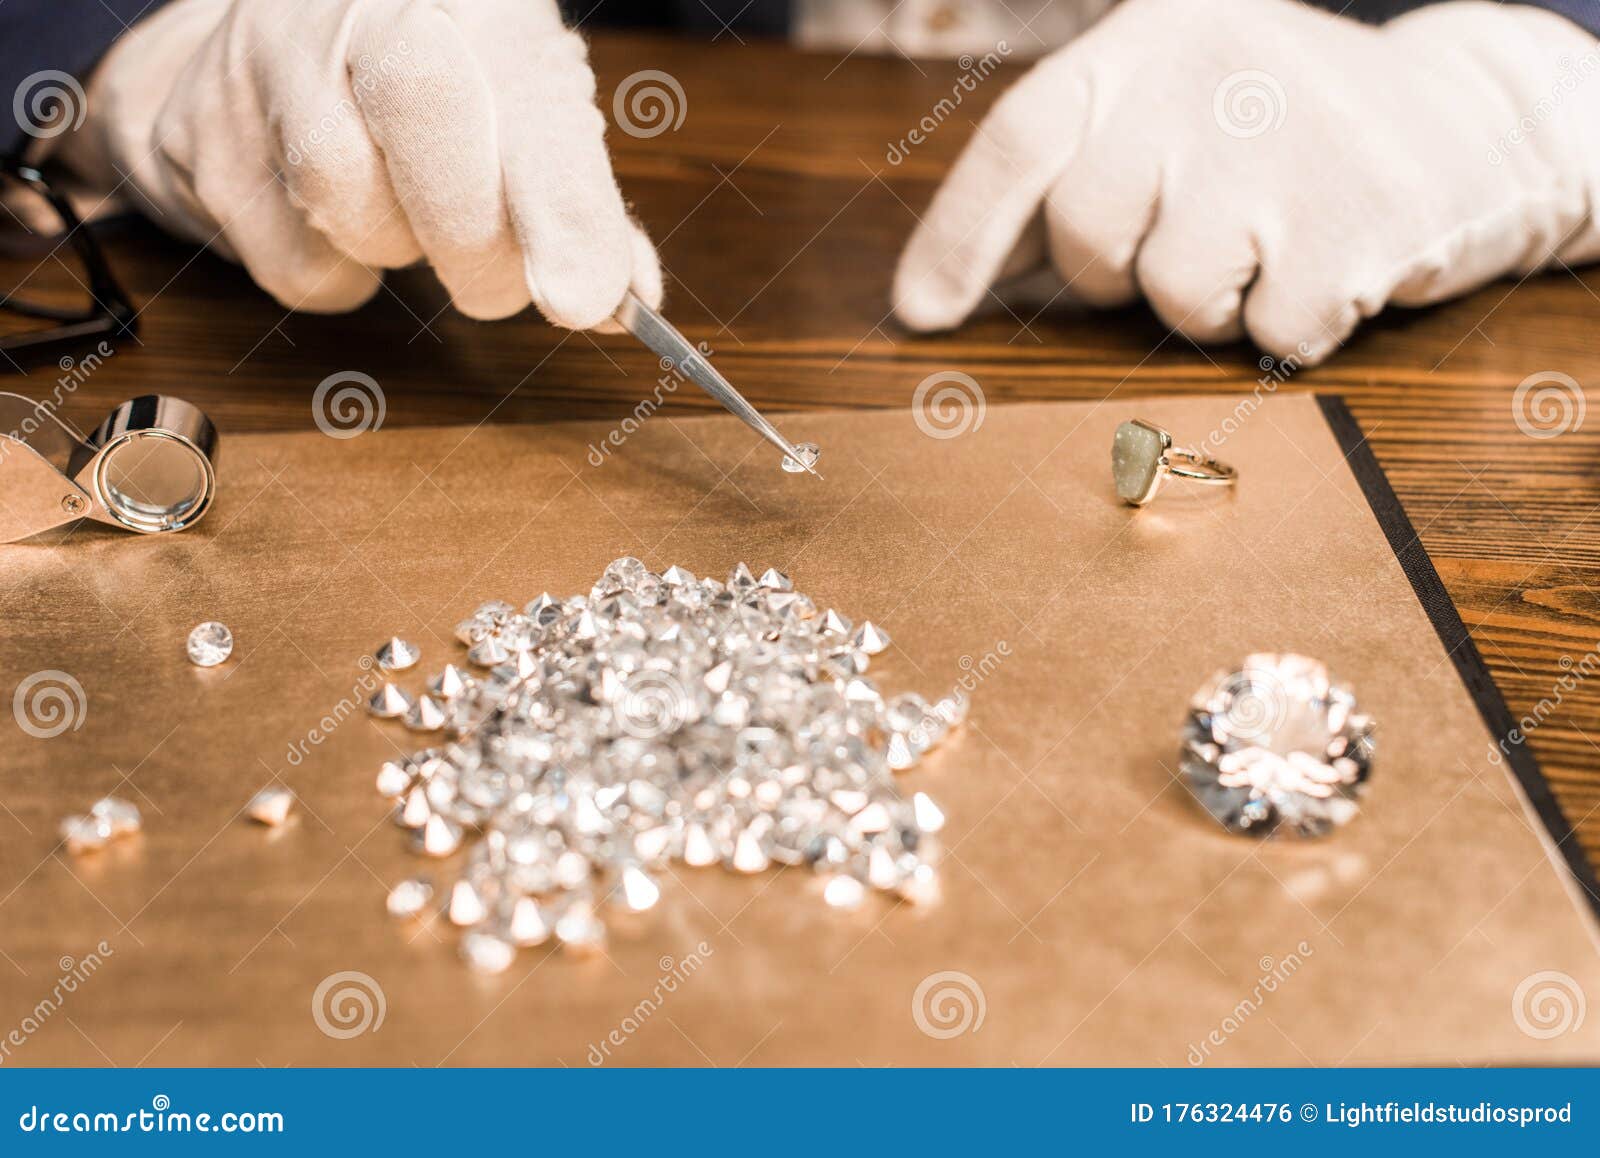 View Of Jewelry Appraiser Holding Gemstone Stock Photo ...